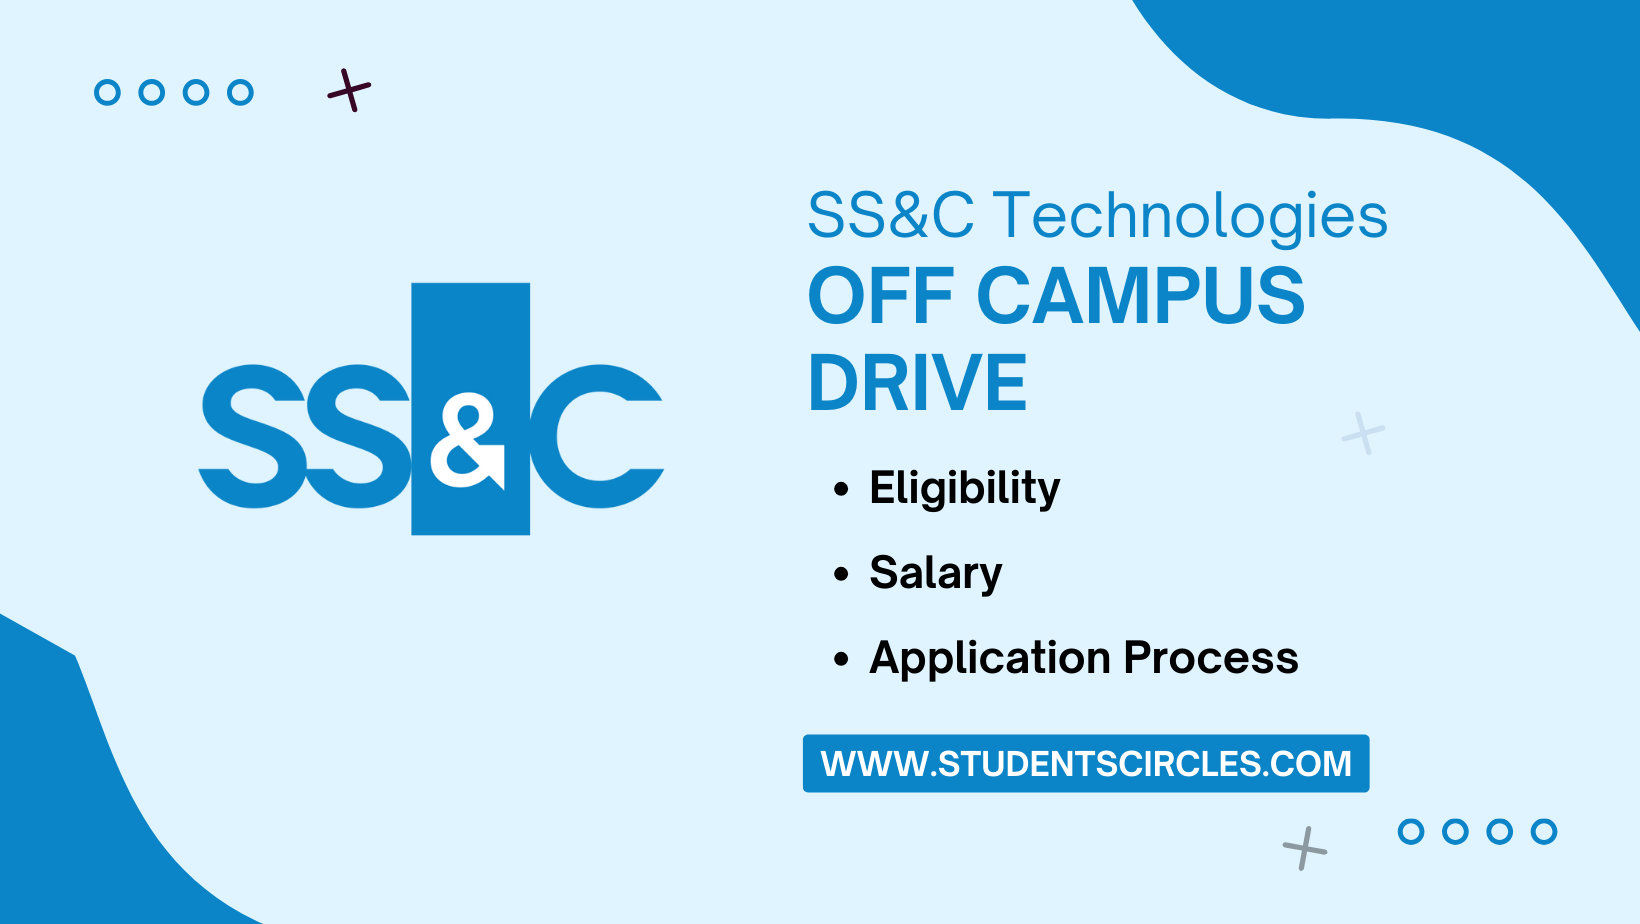 SS&C Technologies Off Campus Drive